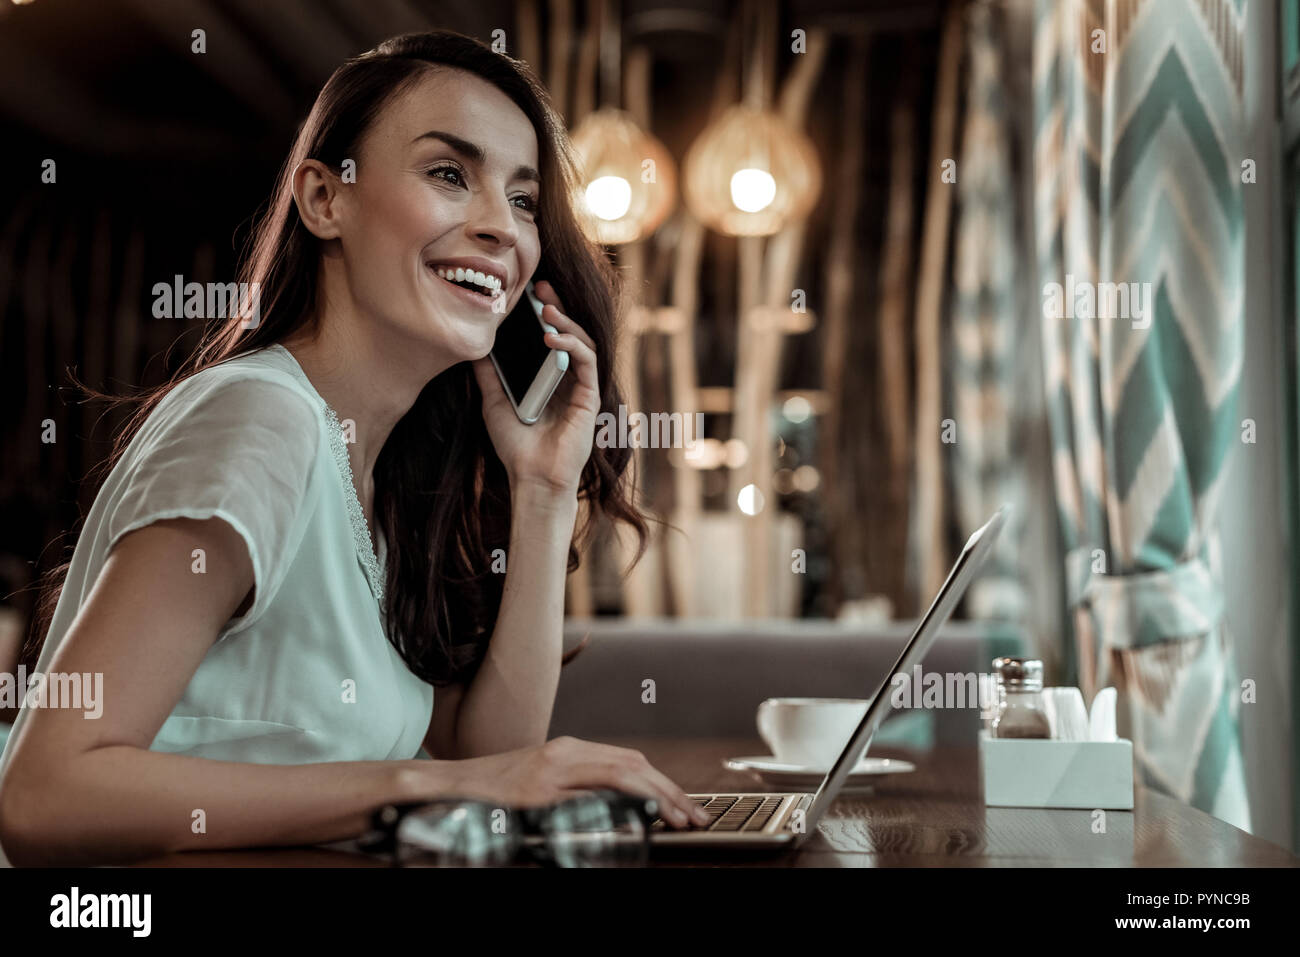 Amazing girl talking per telephone with colleague Stock Photo